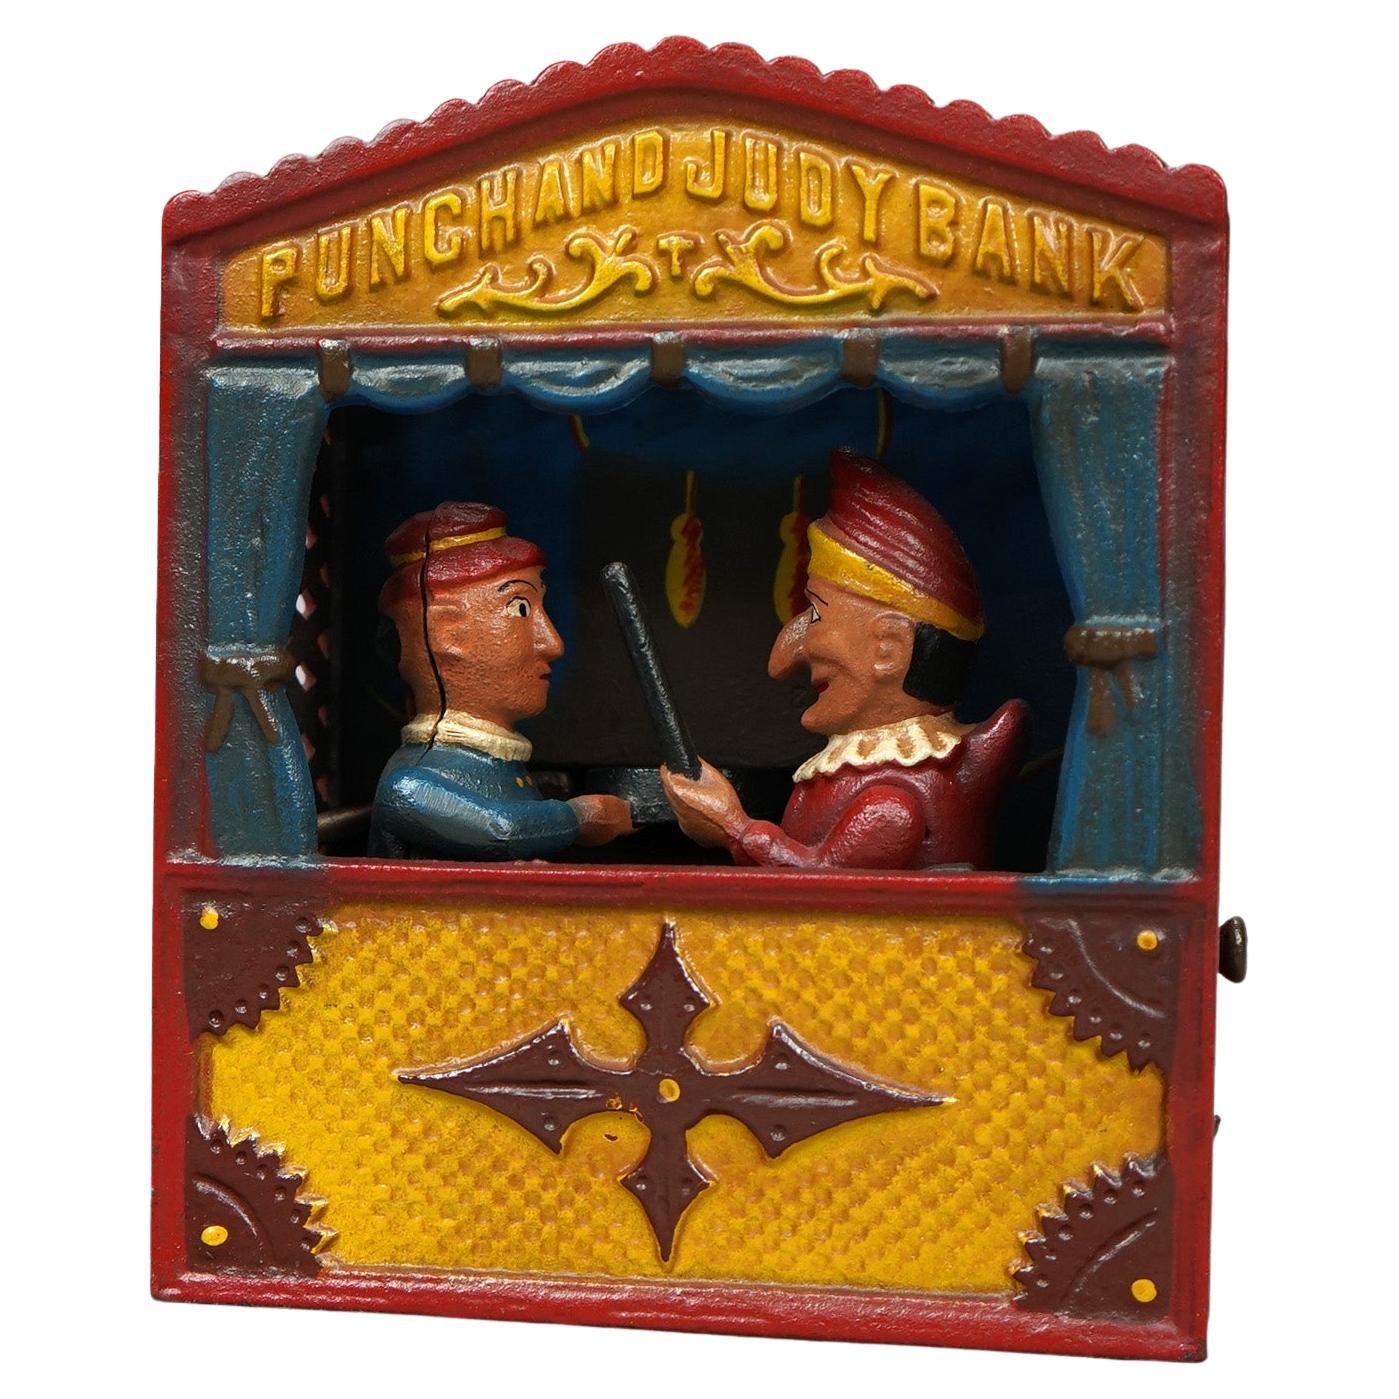 Vintage Cast Iron Book of Knowledge Mechanical Bank, Punch & Judy, 20th Century